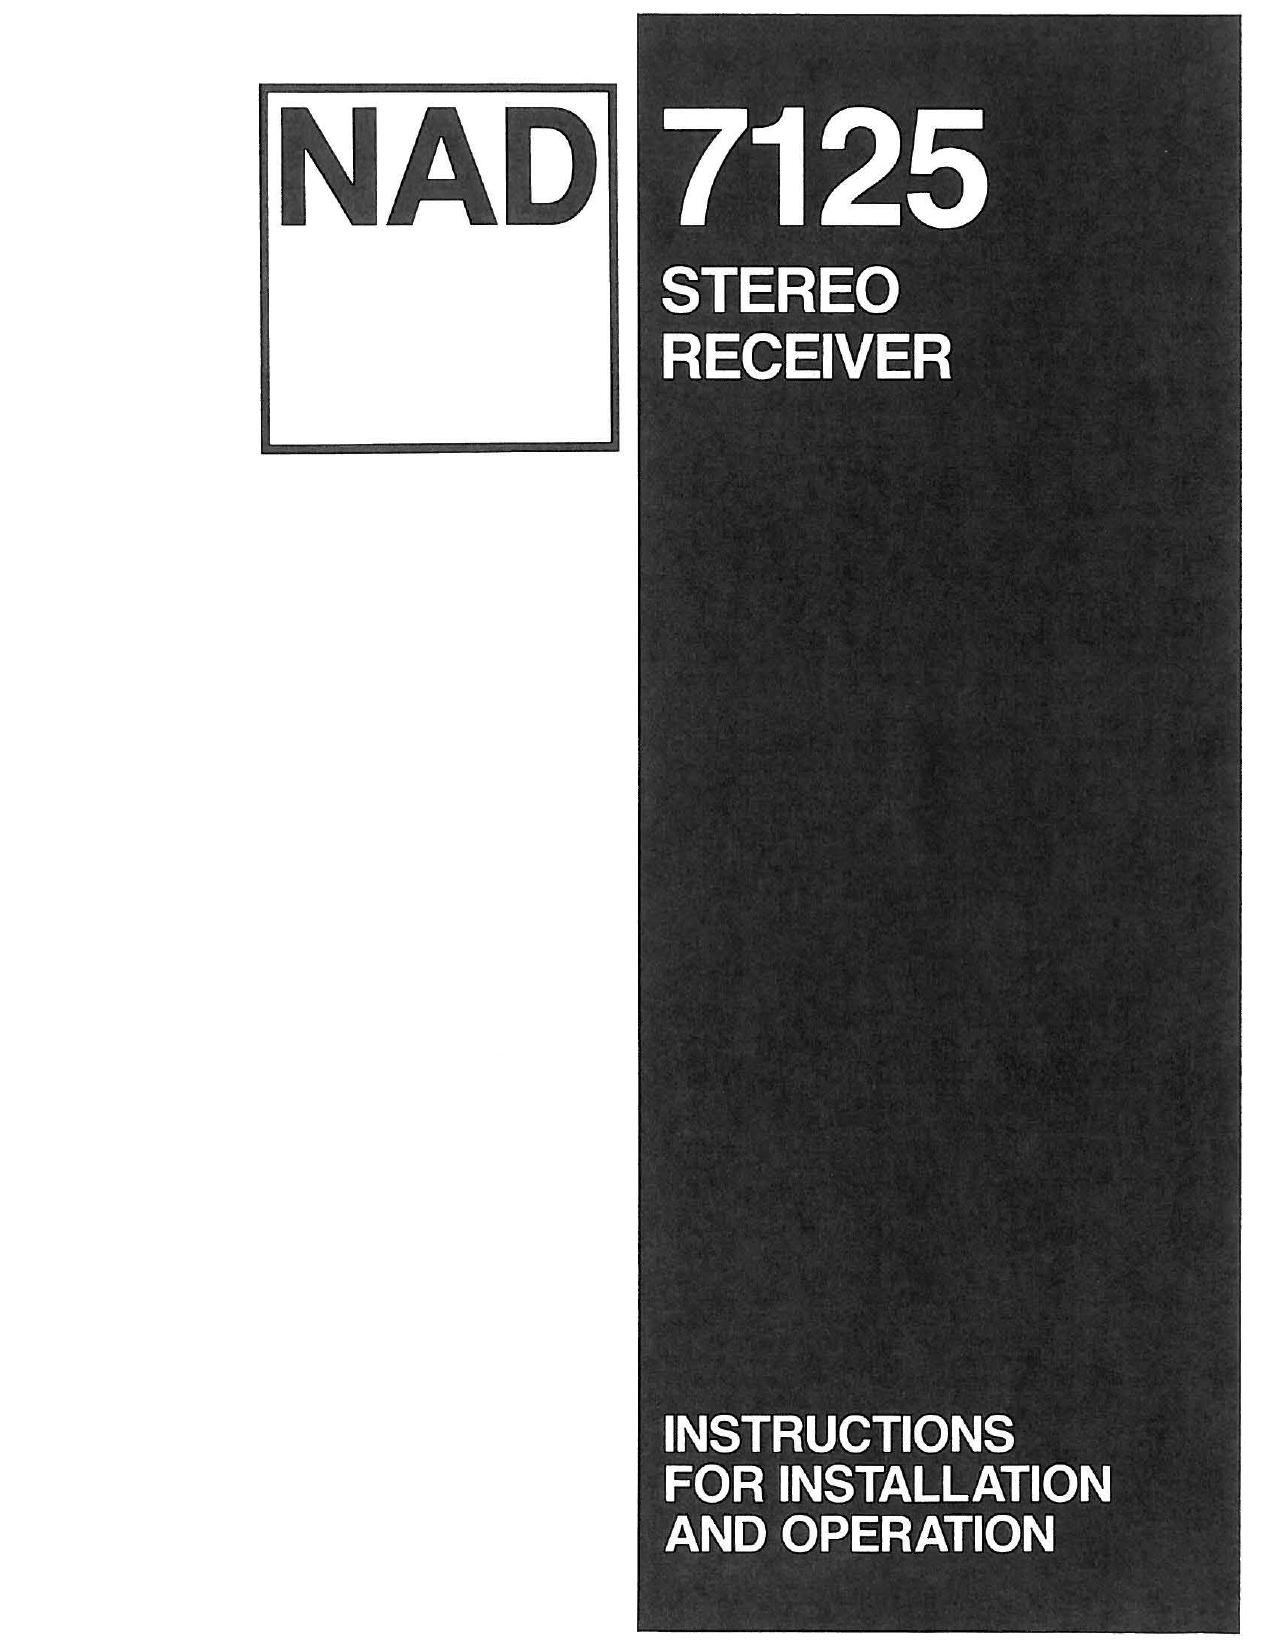 Nad 7125 Owners Manual